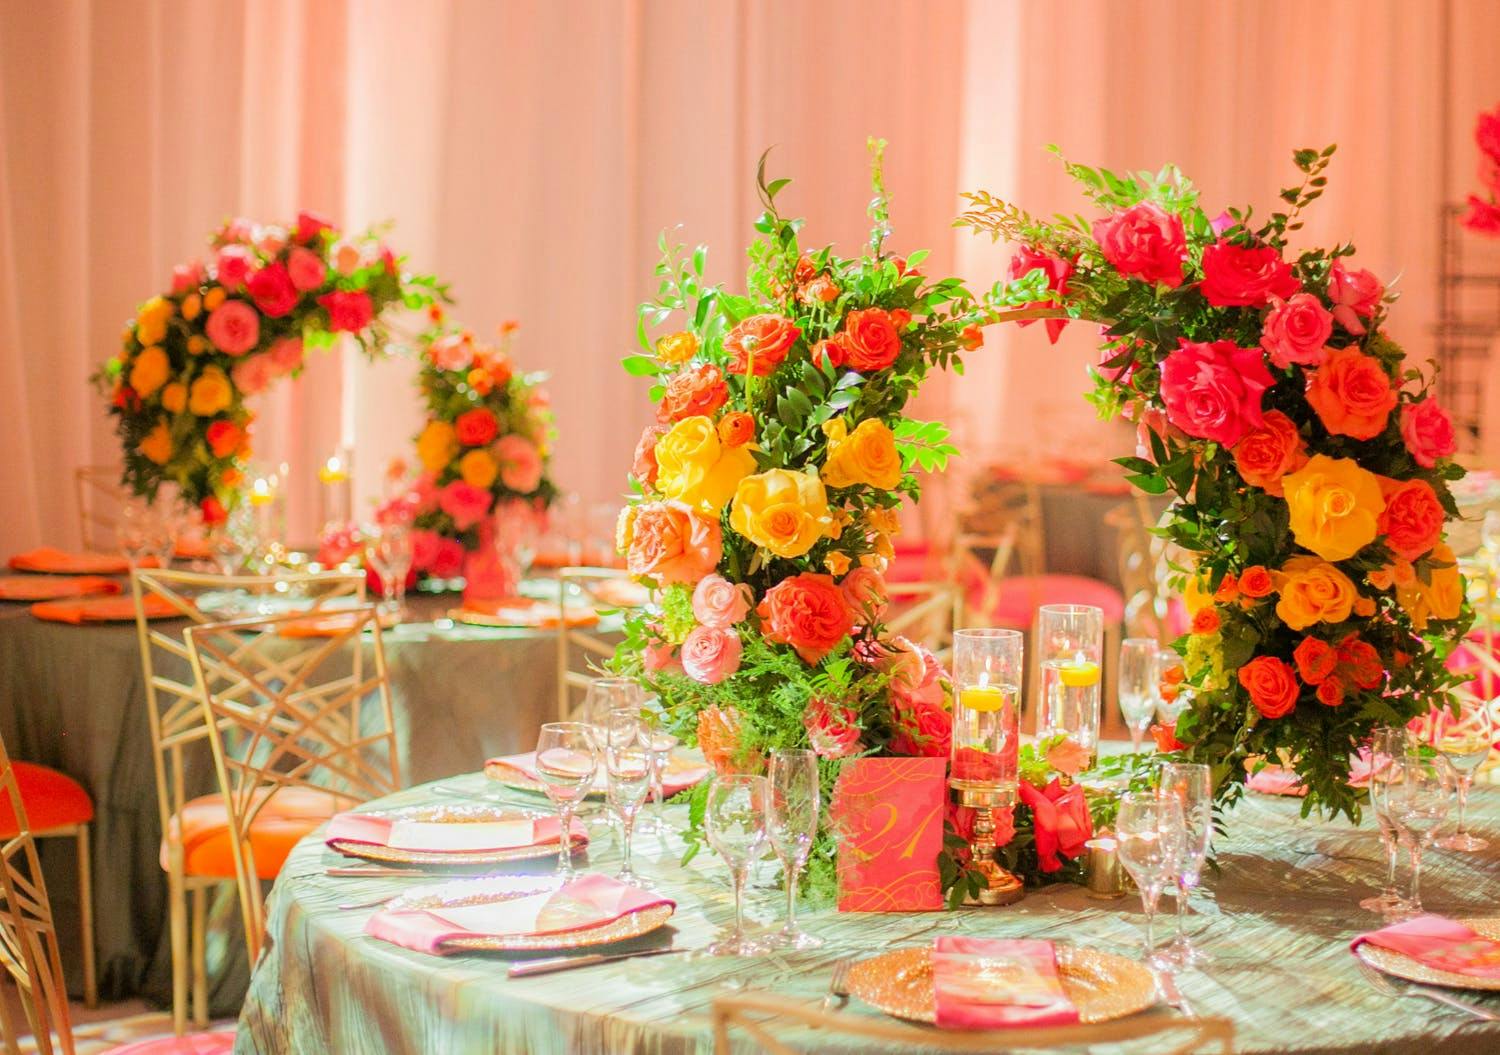 Two banquet tables with pale green linens and pink, yellow, red flower-studded wreath centerpieces against a backdrop of pale pink drapery.